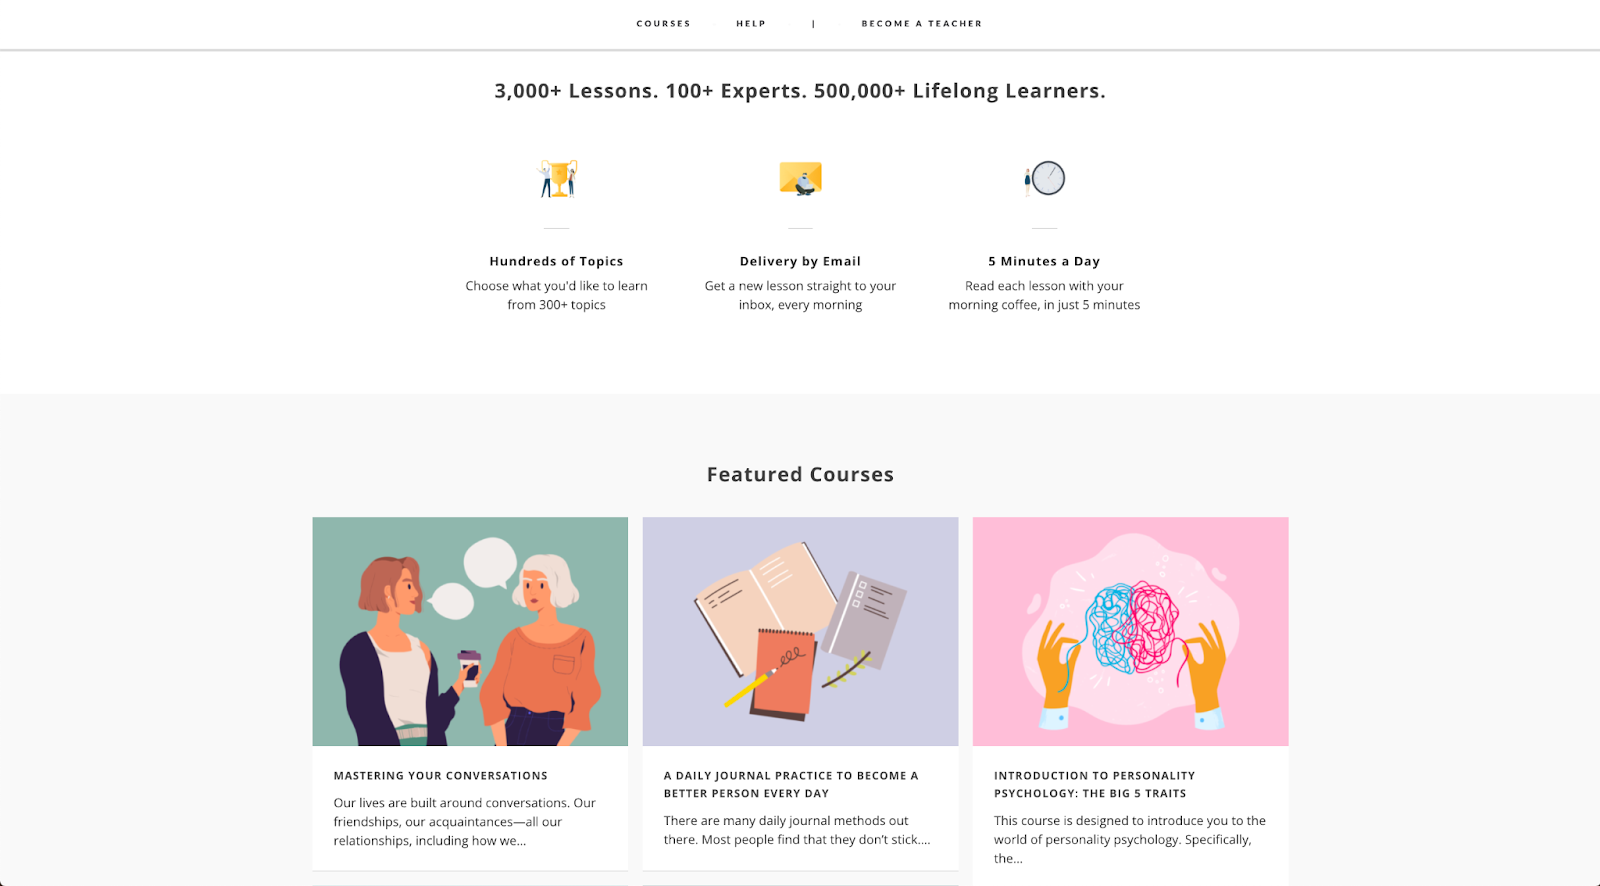 Featured Courses from Highbrow: 3,000 lesson, 100+ experts, 500,000+ lifelong learners. With courses like Mastering Your Conversation, A Daily Journal Practice to Become a Better Person Every Day, Introduction to Personality Psychology: The Big 5 Traits